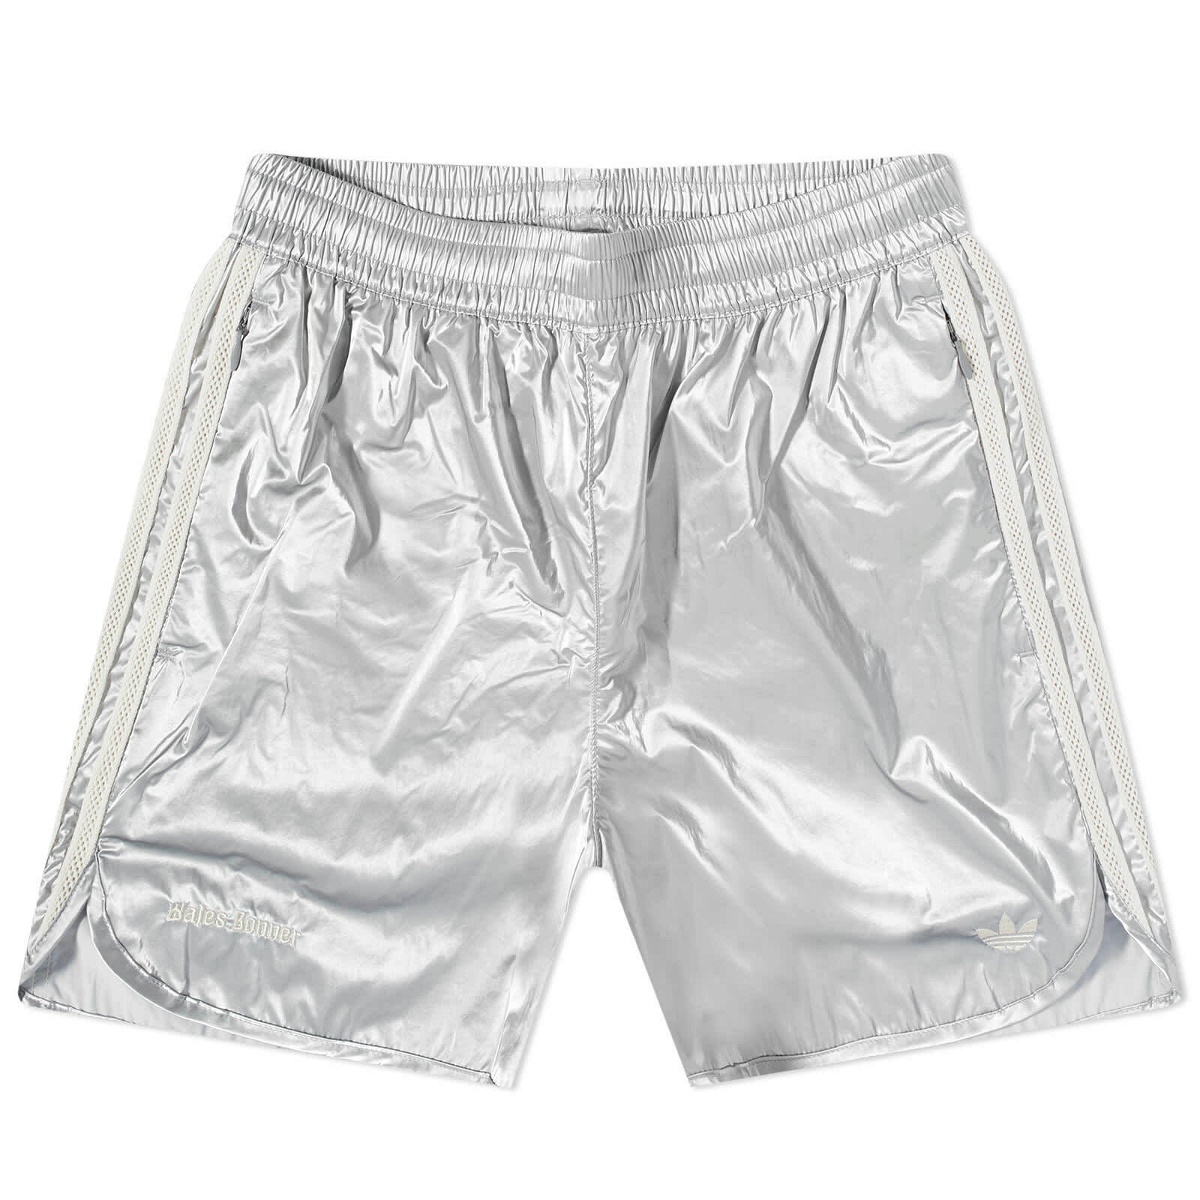 Photo: Adidas Consortium x Wales Bonner Shorts in Silver